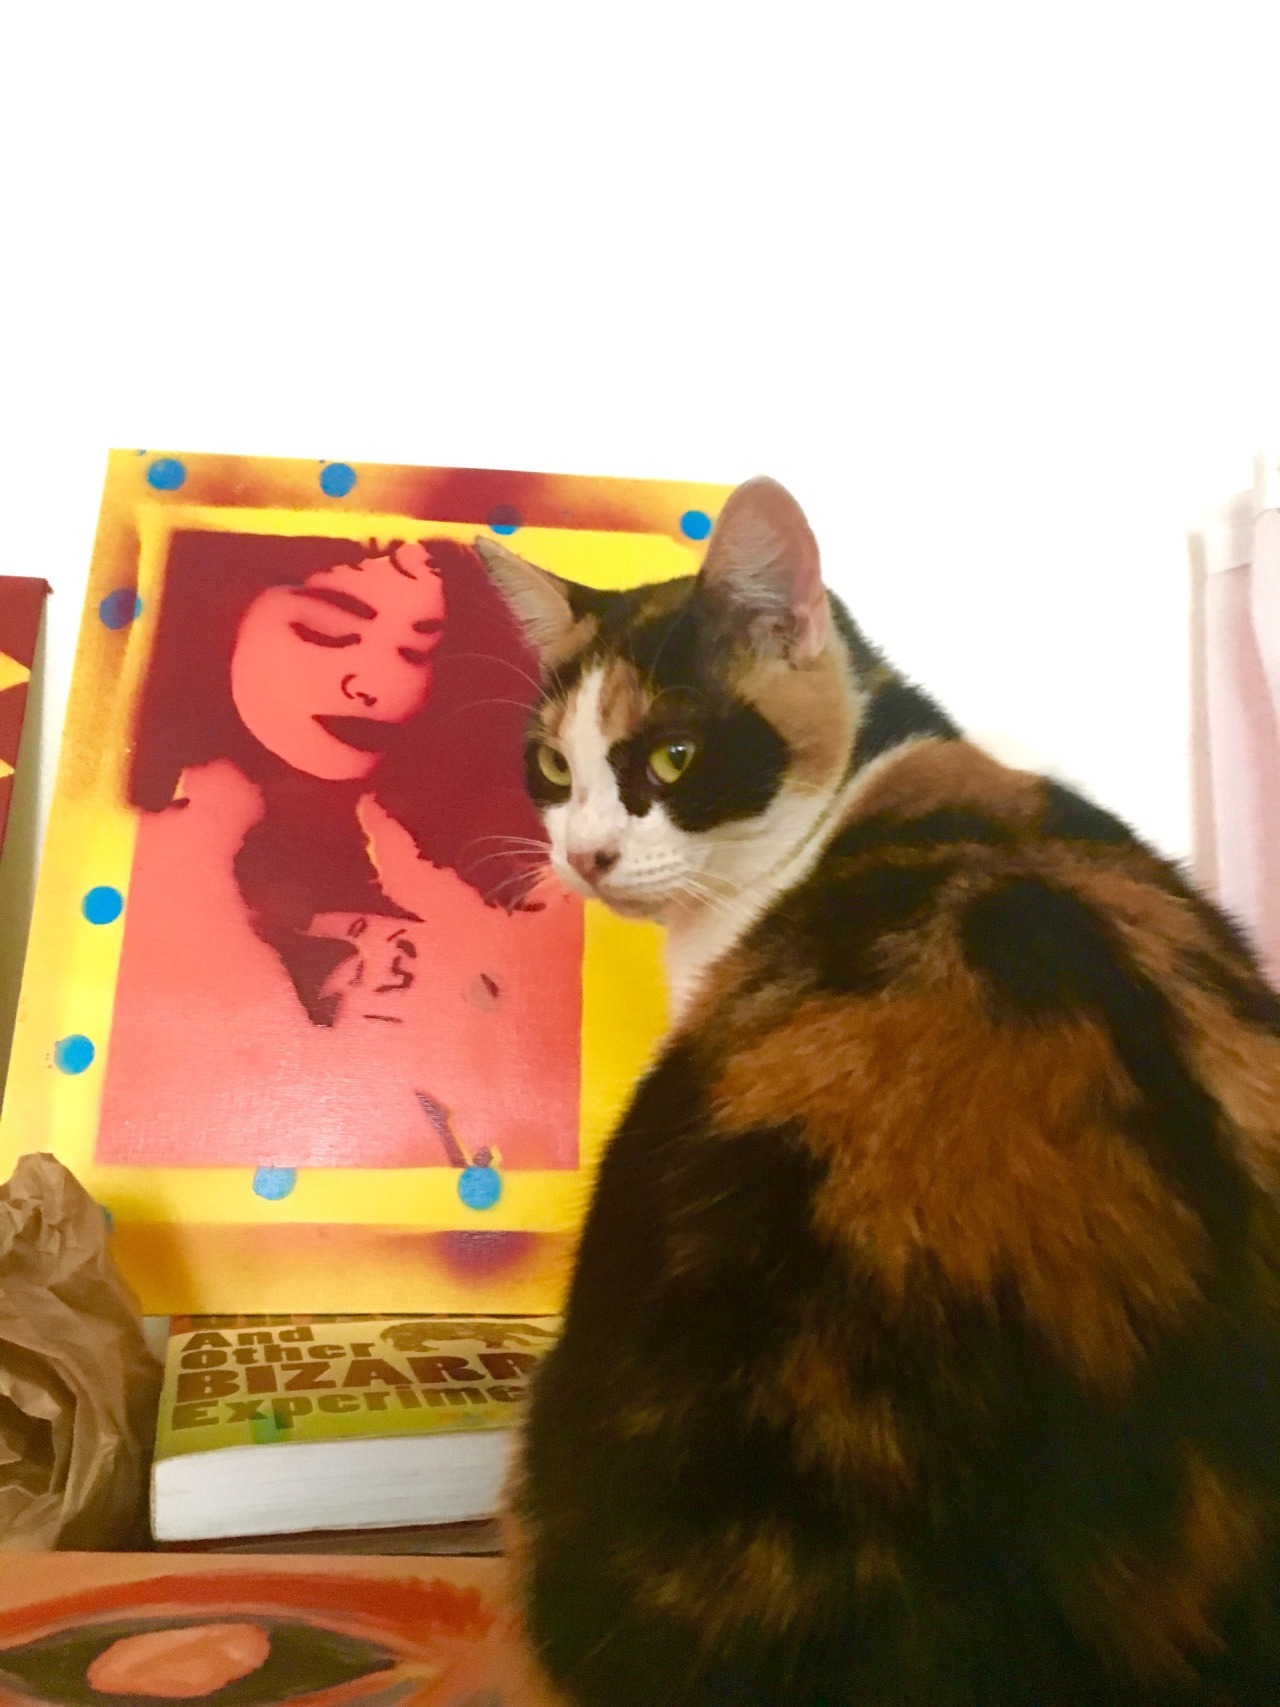 Kitty Uchis + a gift of art by Lionel 😇